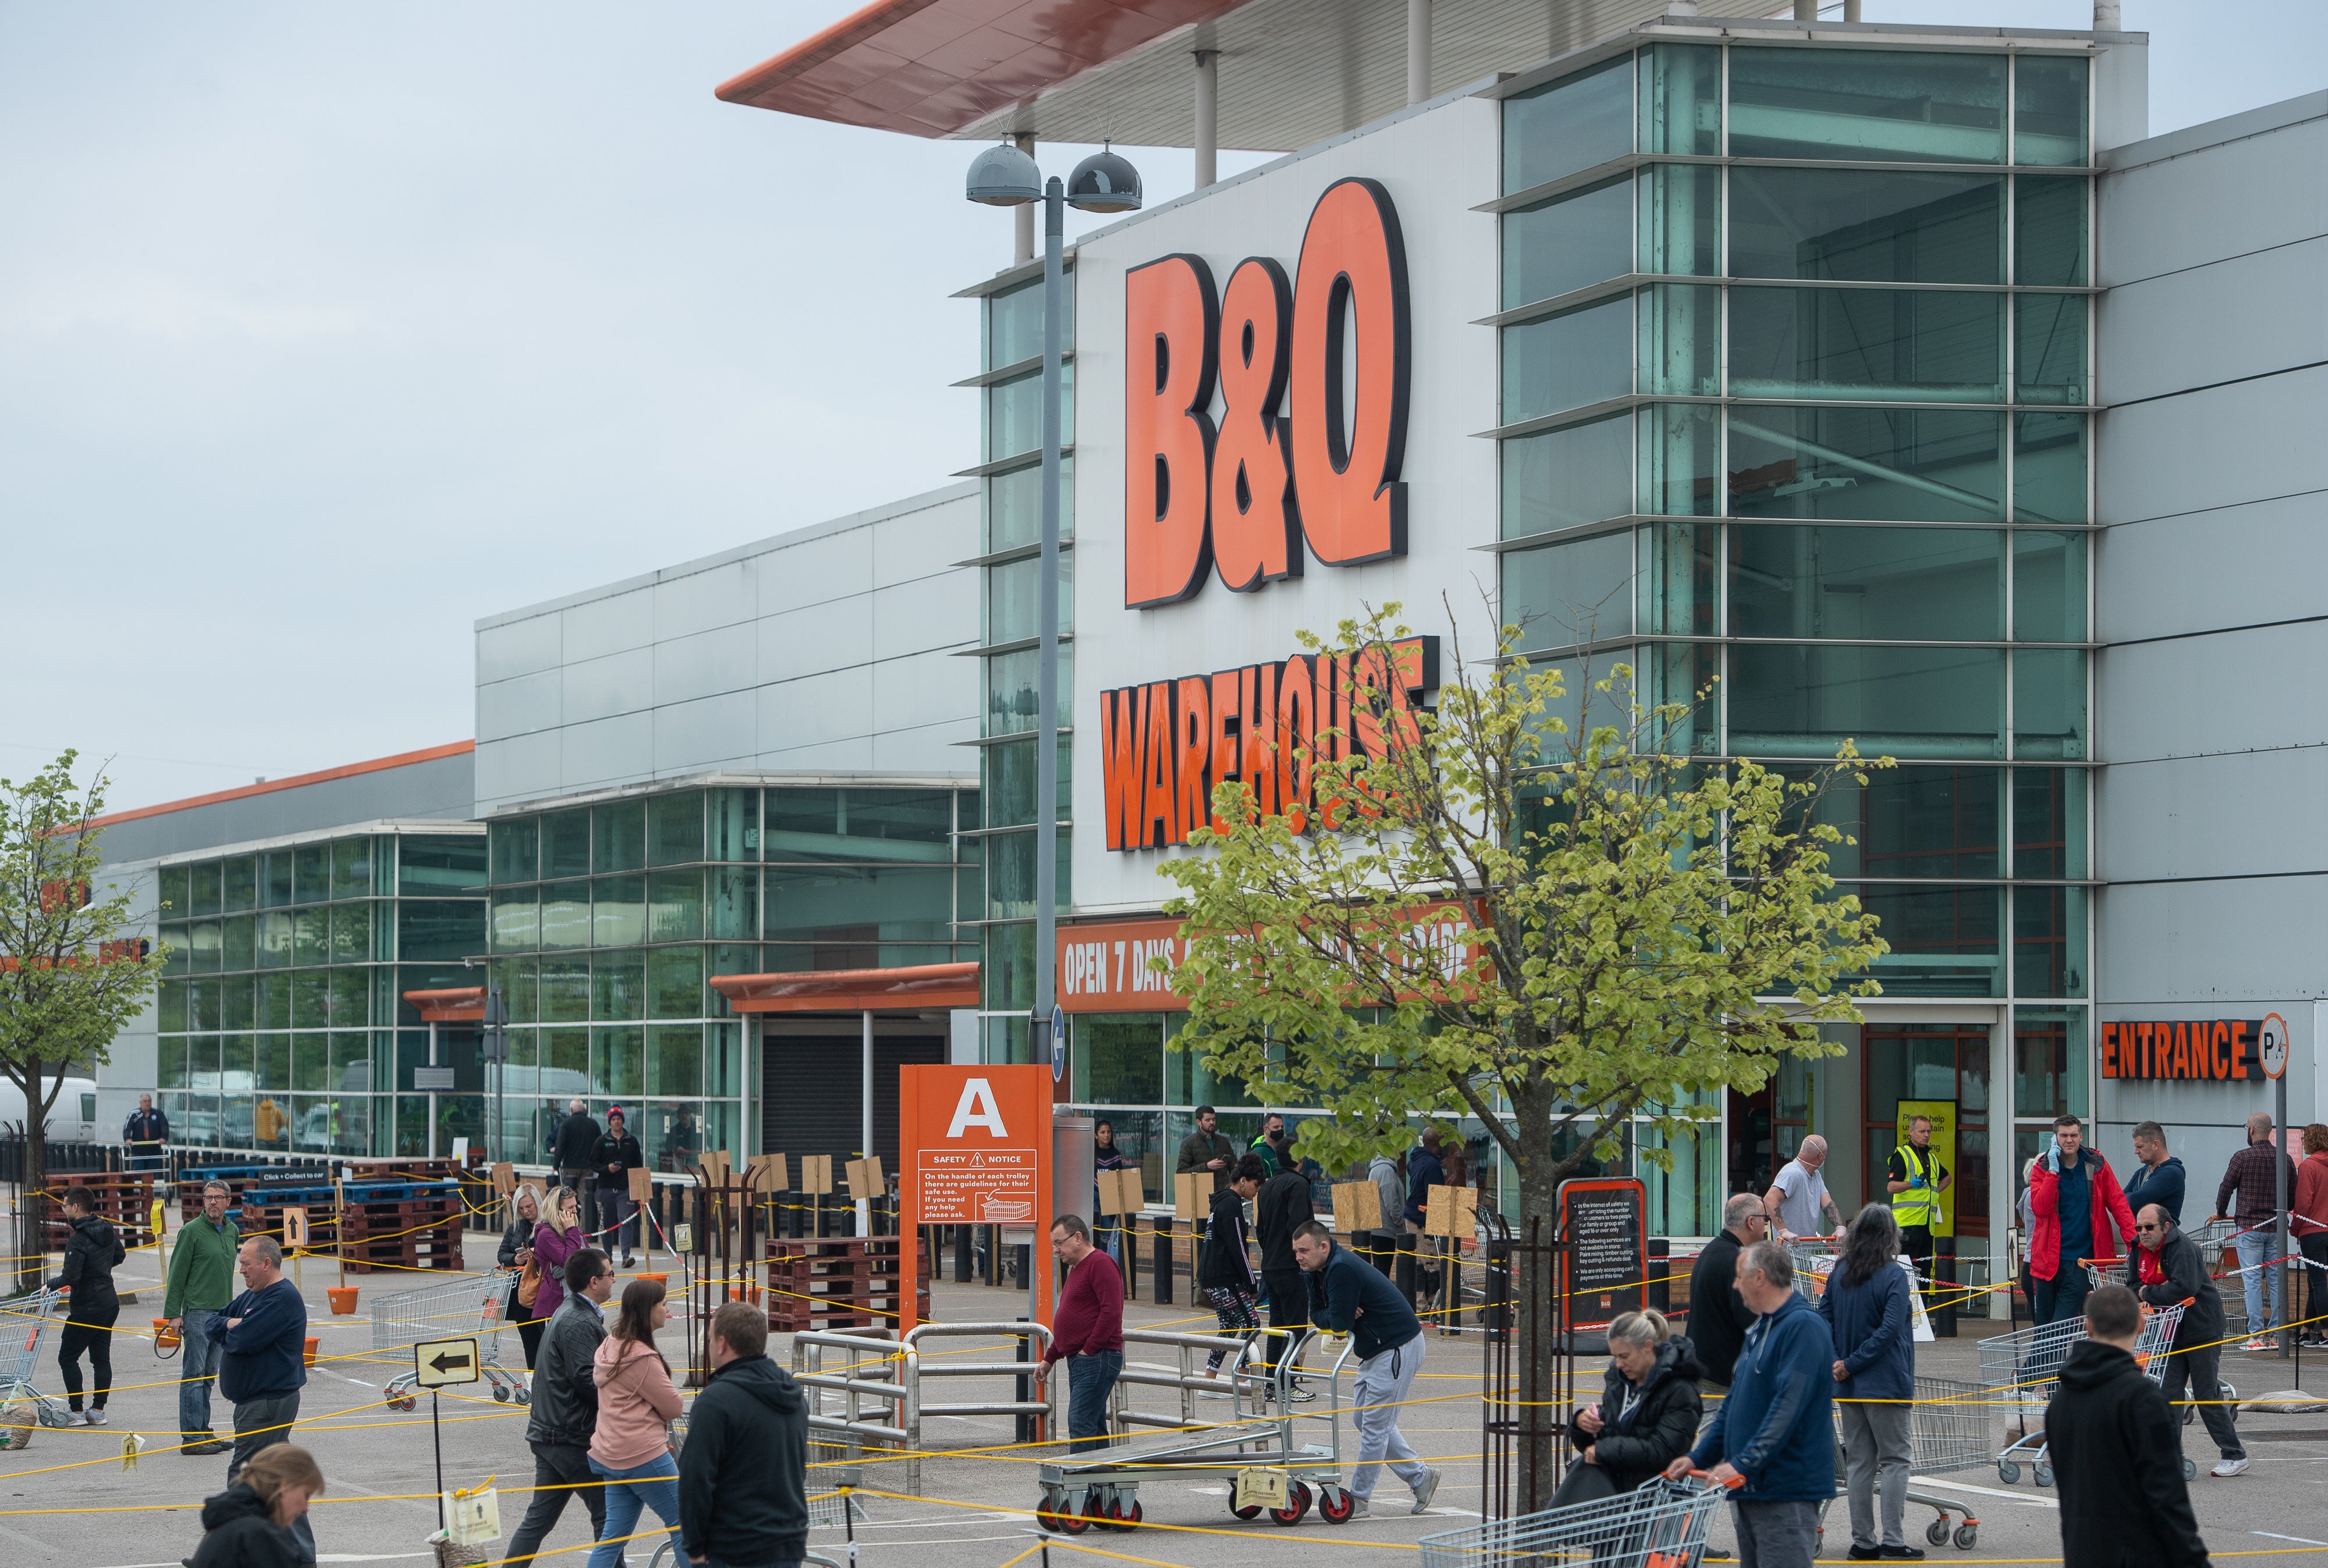 B&Q owner Kingfisher is expected to post further sales growth amid a boom in DIY demand (Joe Giddens/PA)